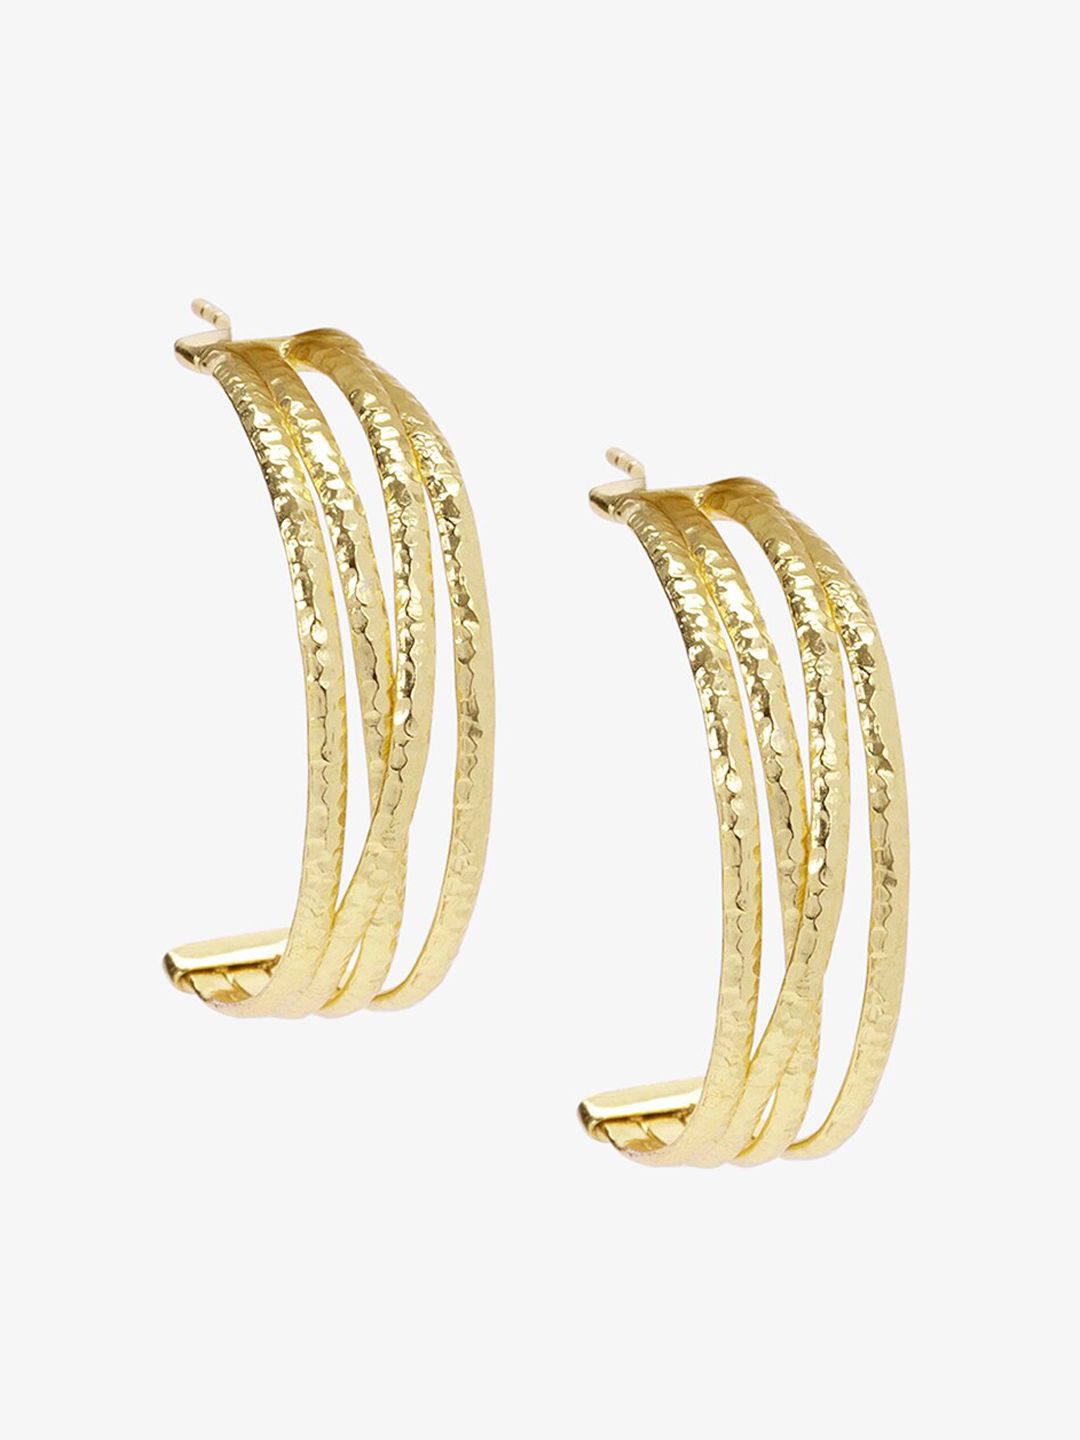 Mikoto by FableStreet Gold-Toned Contemporary Hoop Earrings Price in India